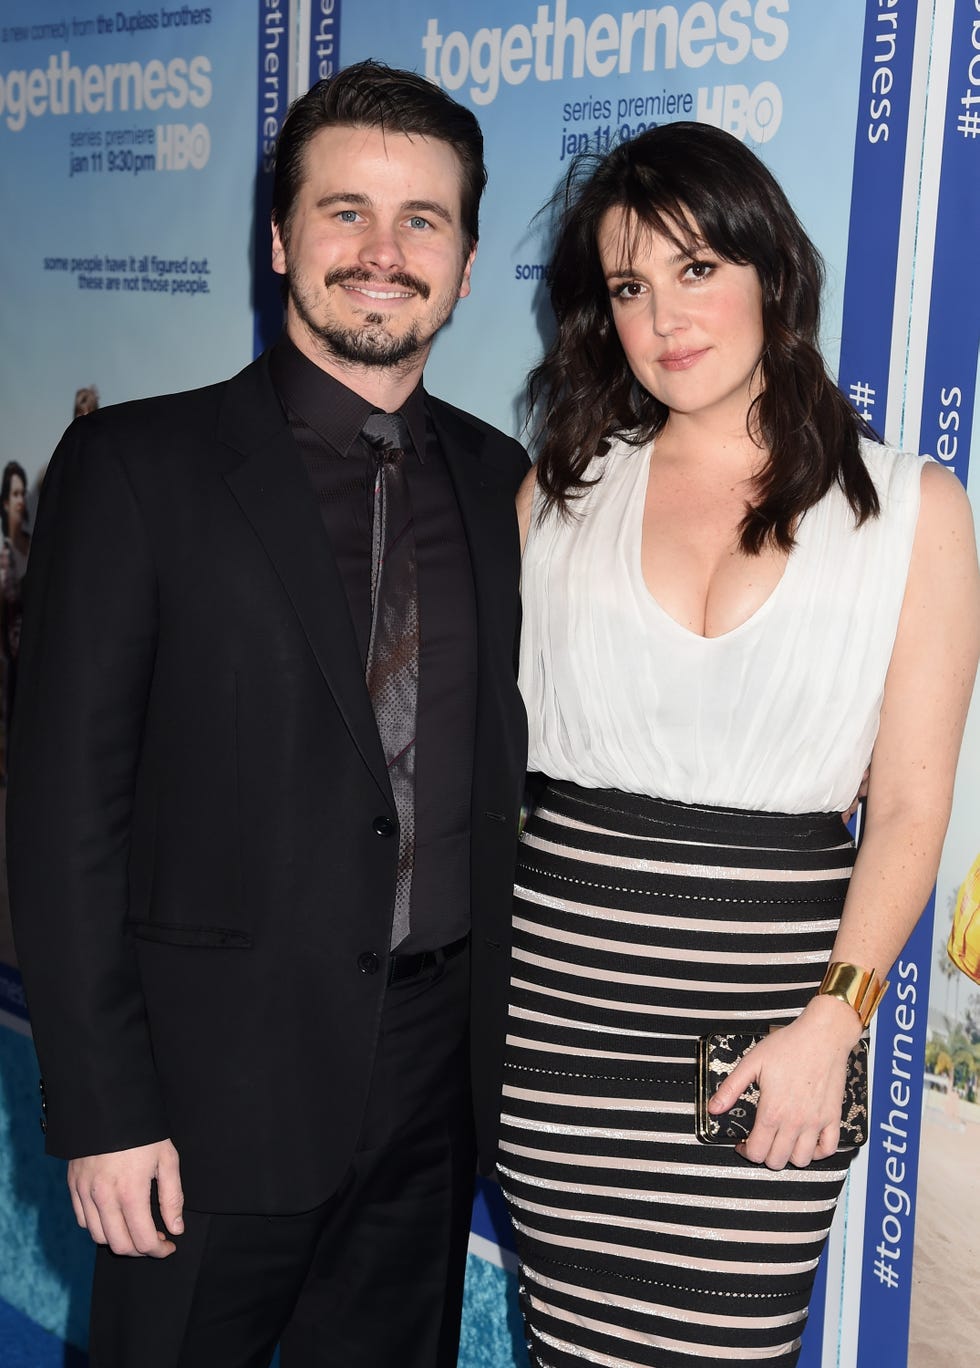 hbo's "togetherness" los angeles premiere and after party